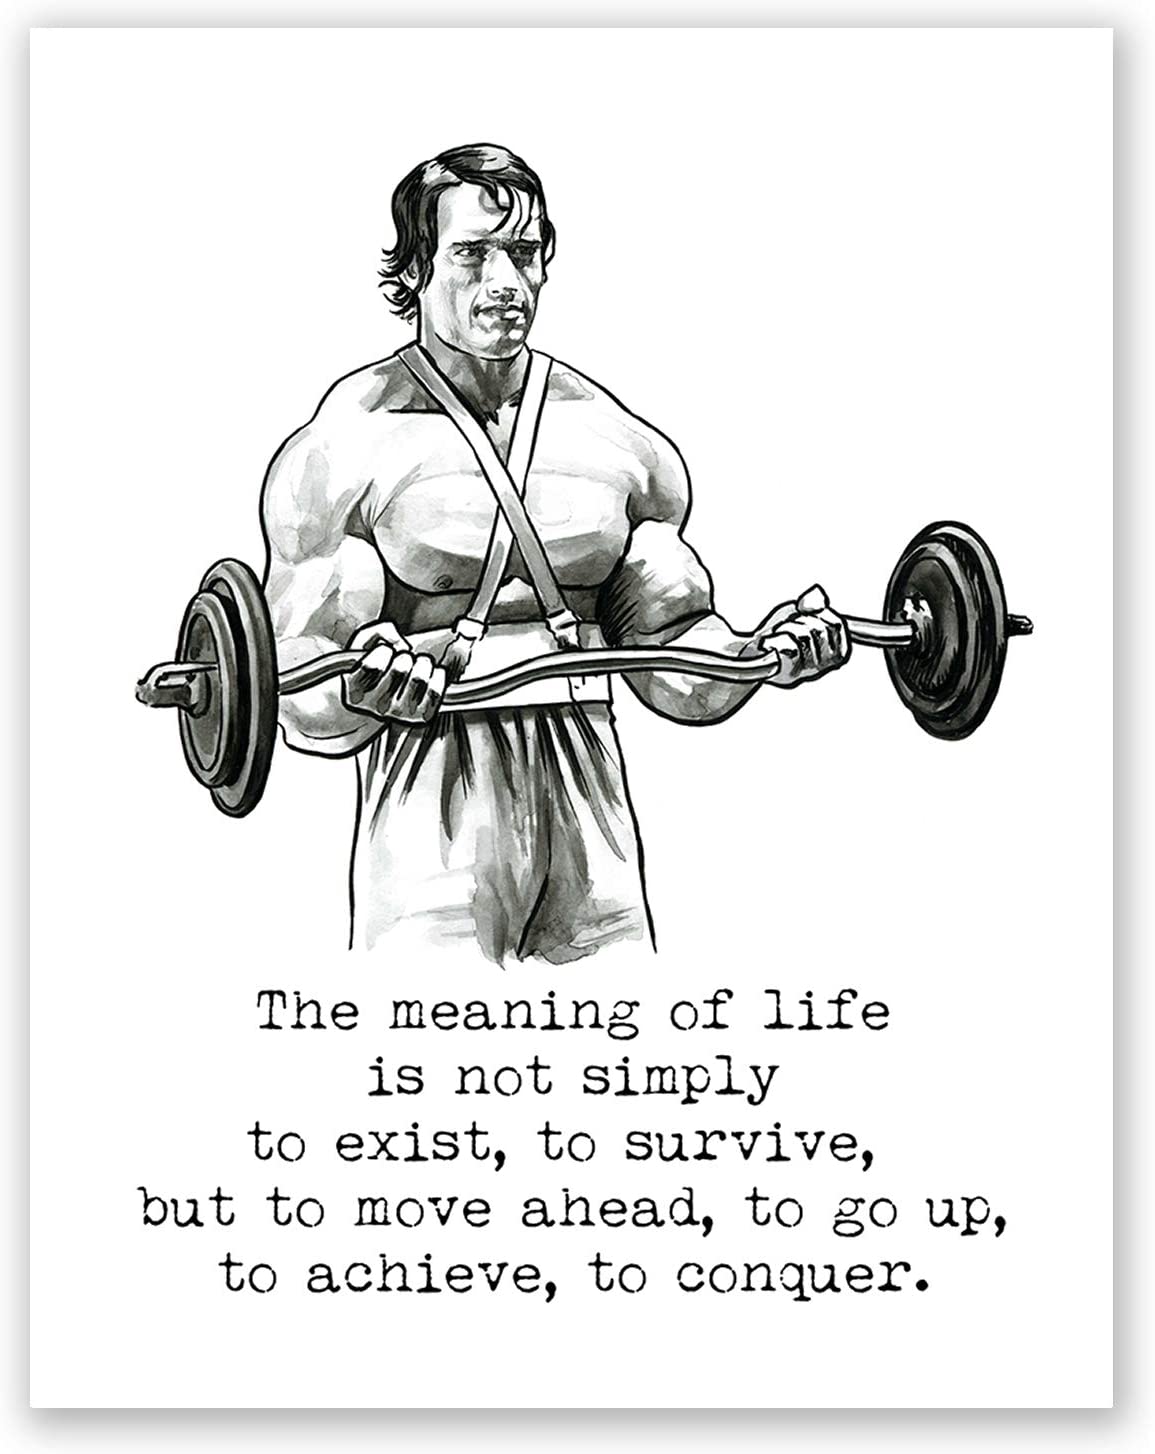 AtoZStudio A61 Arnold Schwarzenegger Poster // Quote // Home Gym Wall Art Decor // Motivational Print Conquer // Fitness Artwork // Bodybuilding Picture // Training // Mr Olympia (8x10): Posters & Prints